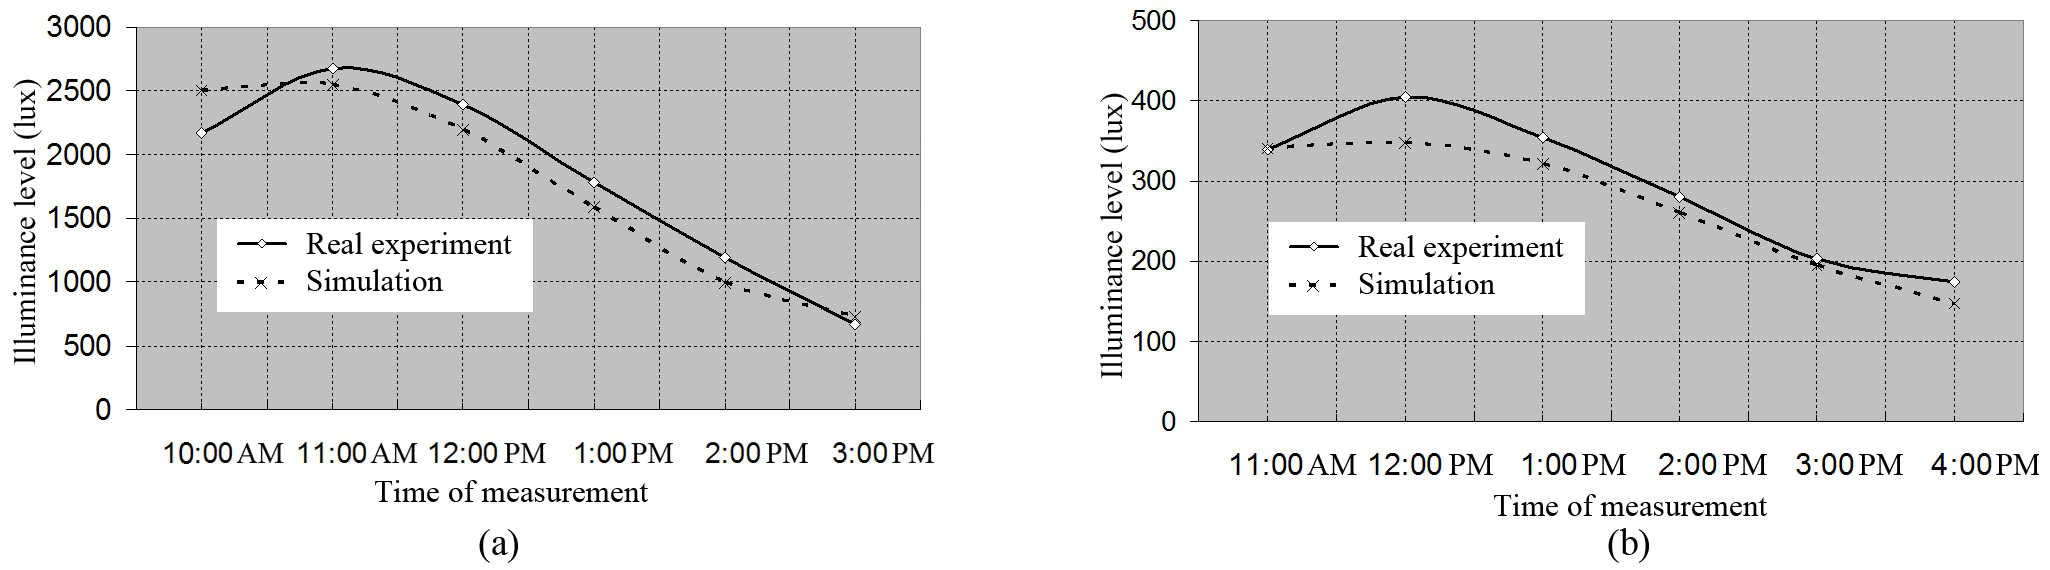 Comparison of experimental and simulation results for a room served by LCP and curved ceiling with ratio (4:5) at (a) 1 m and (b) 7 m from the window.